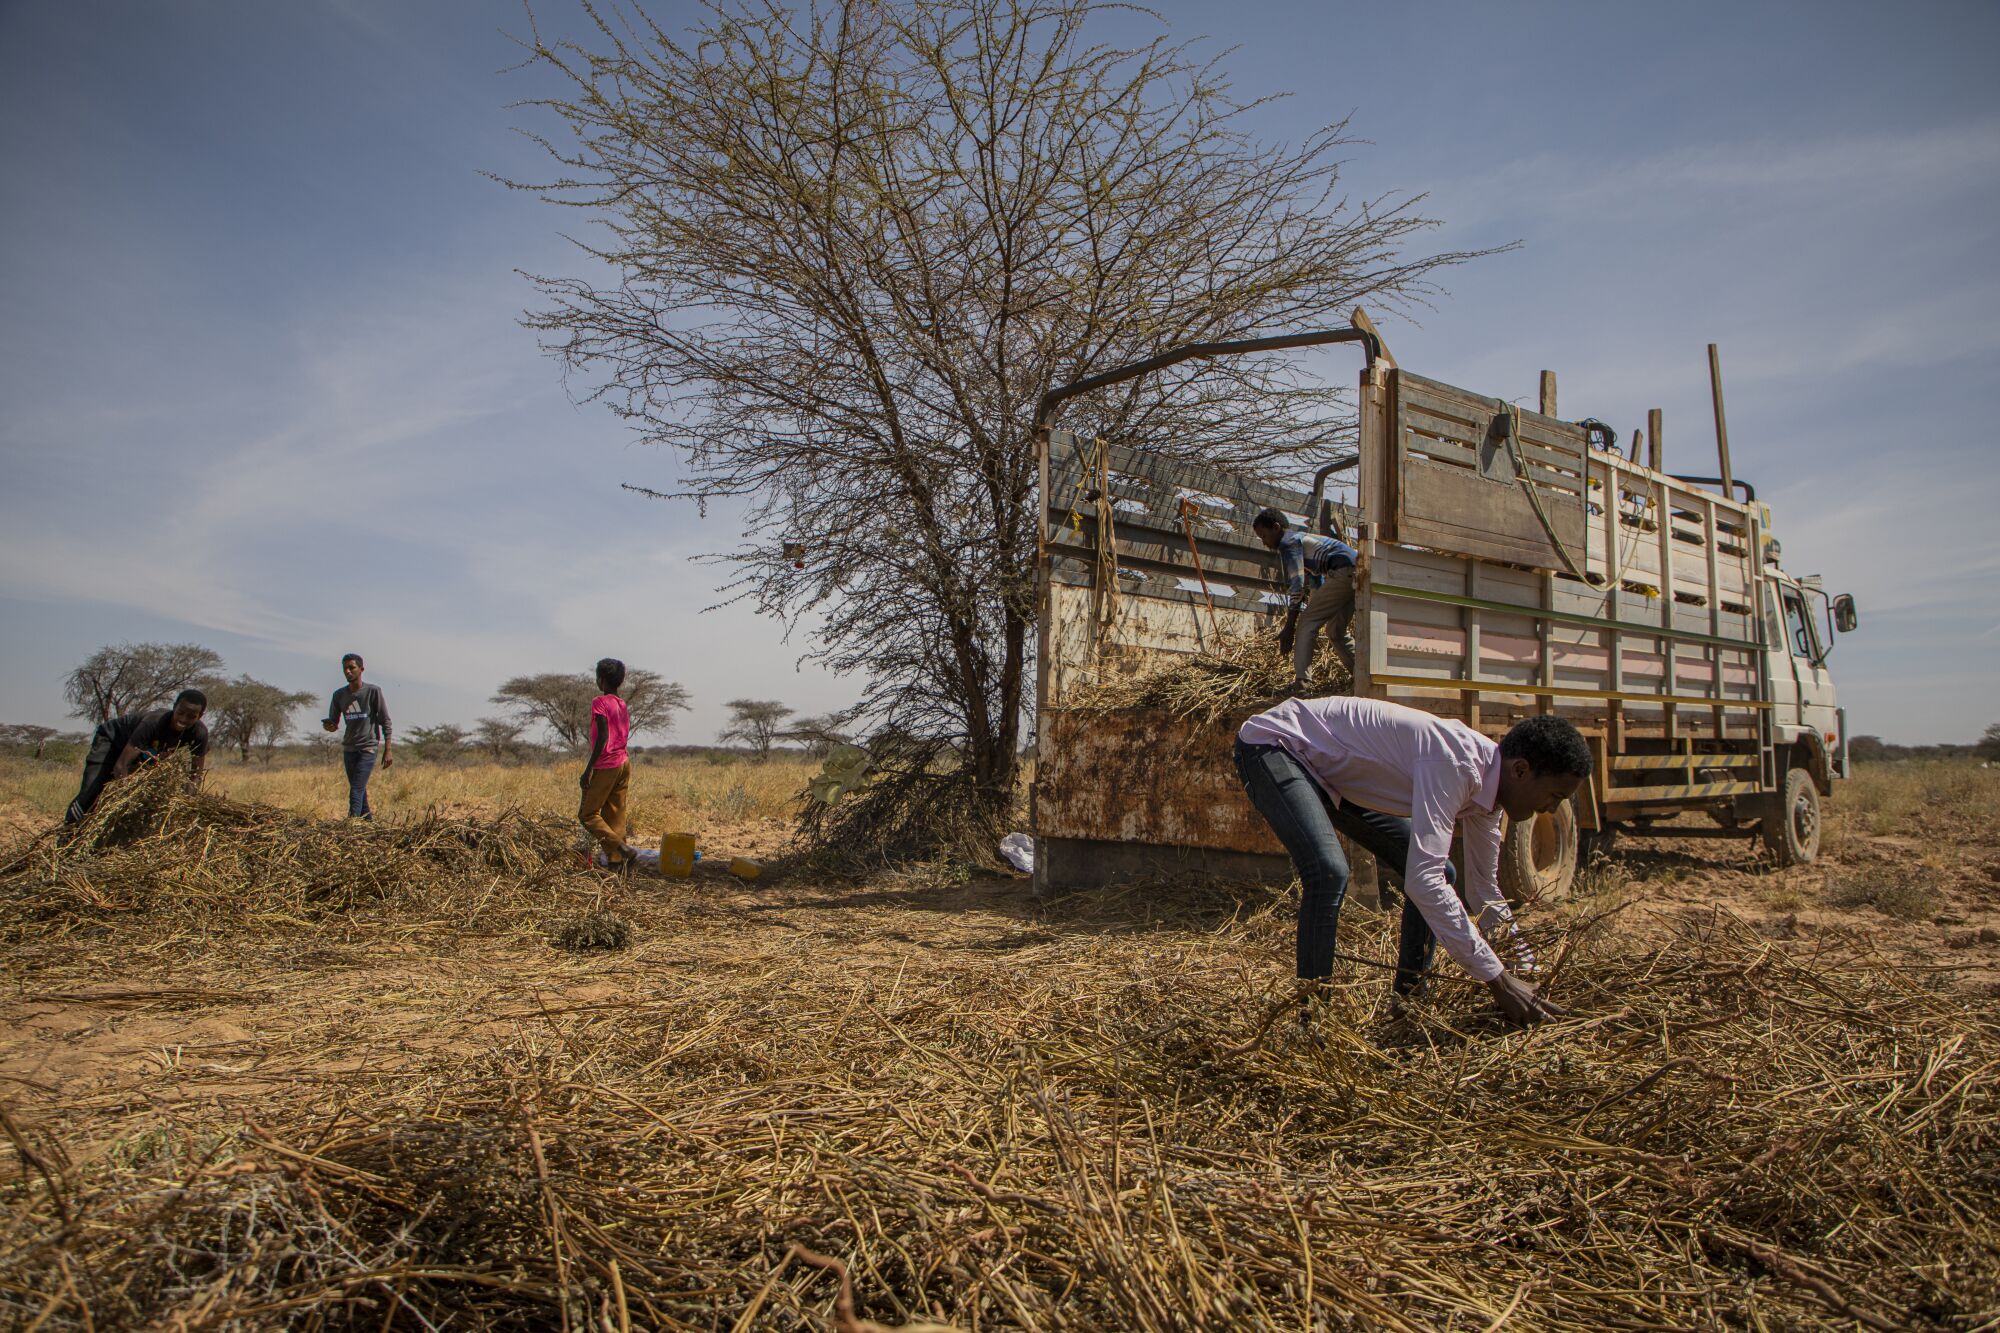 Workers collect the remains of a sesame crop that was eaten by a desert locust swarm in late 2019.